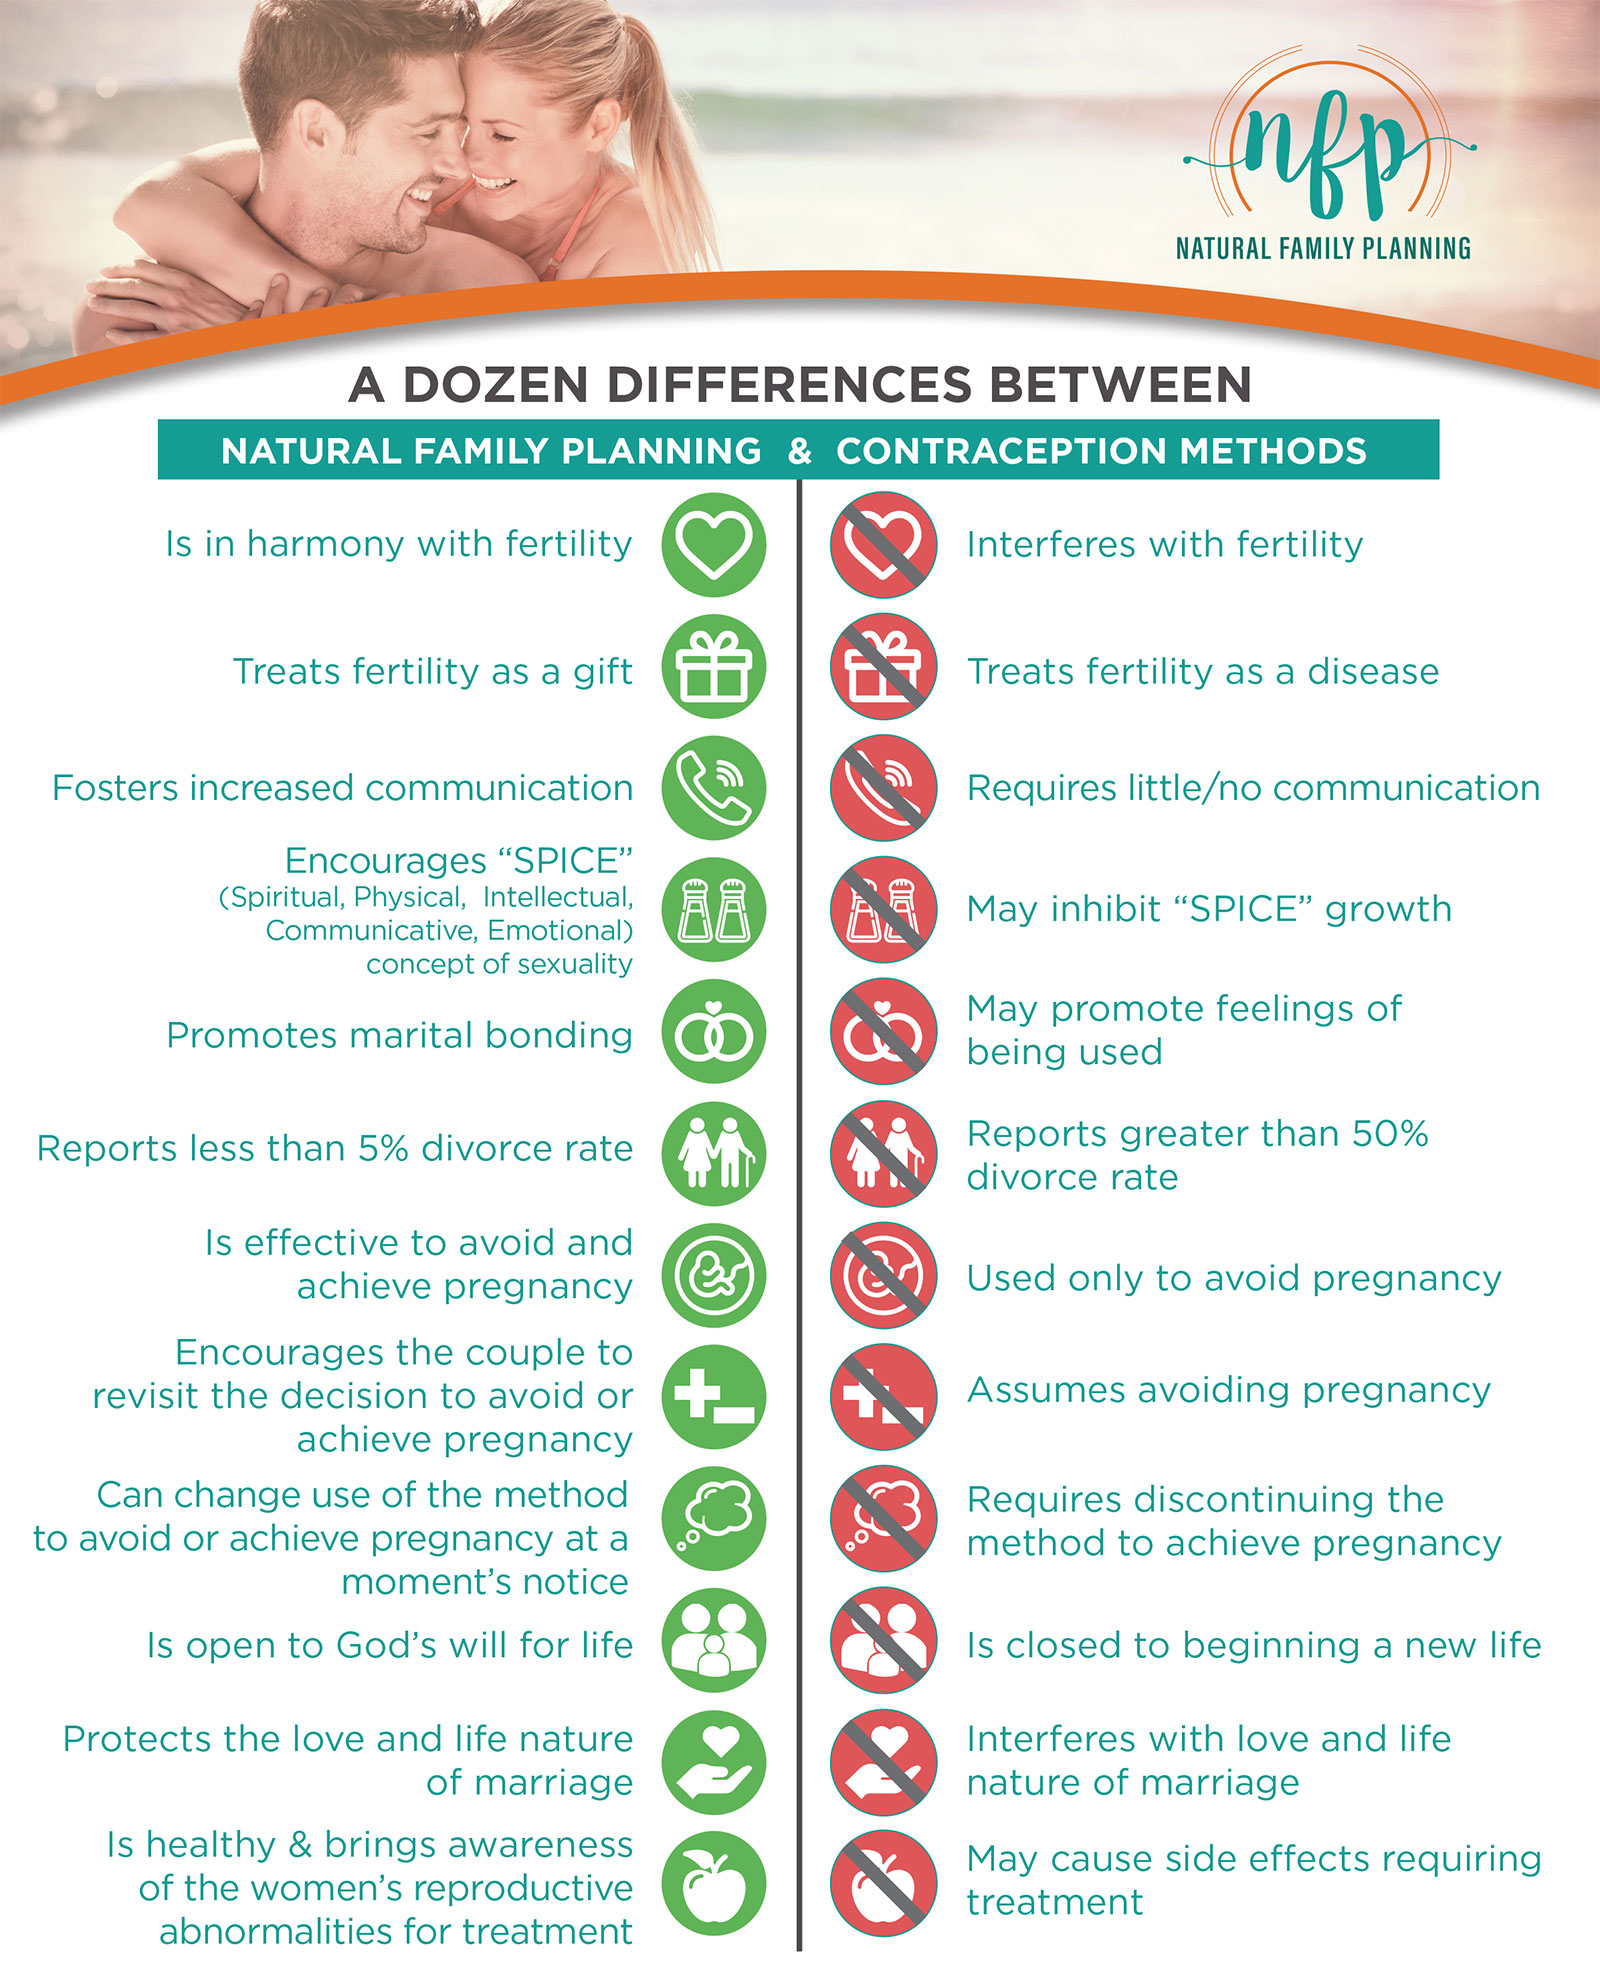 A dozen differences between Natural Family Planning and contraception